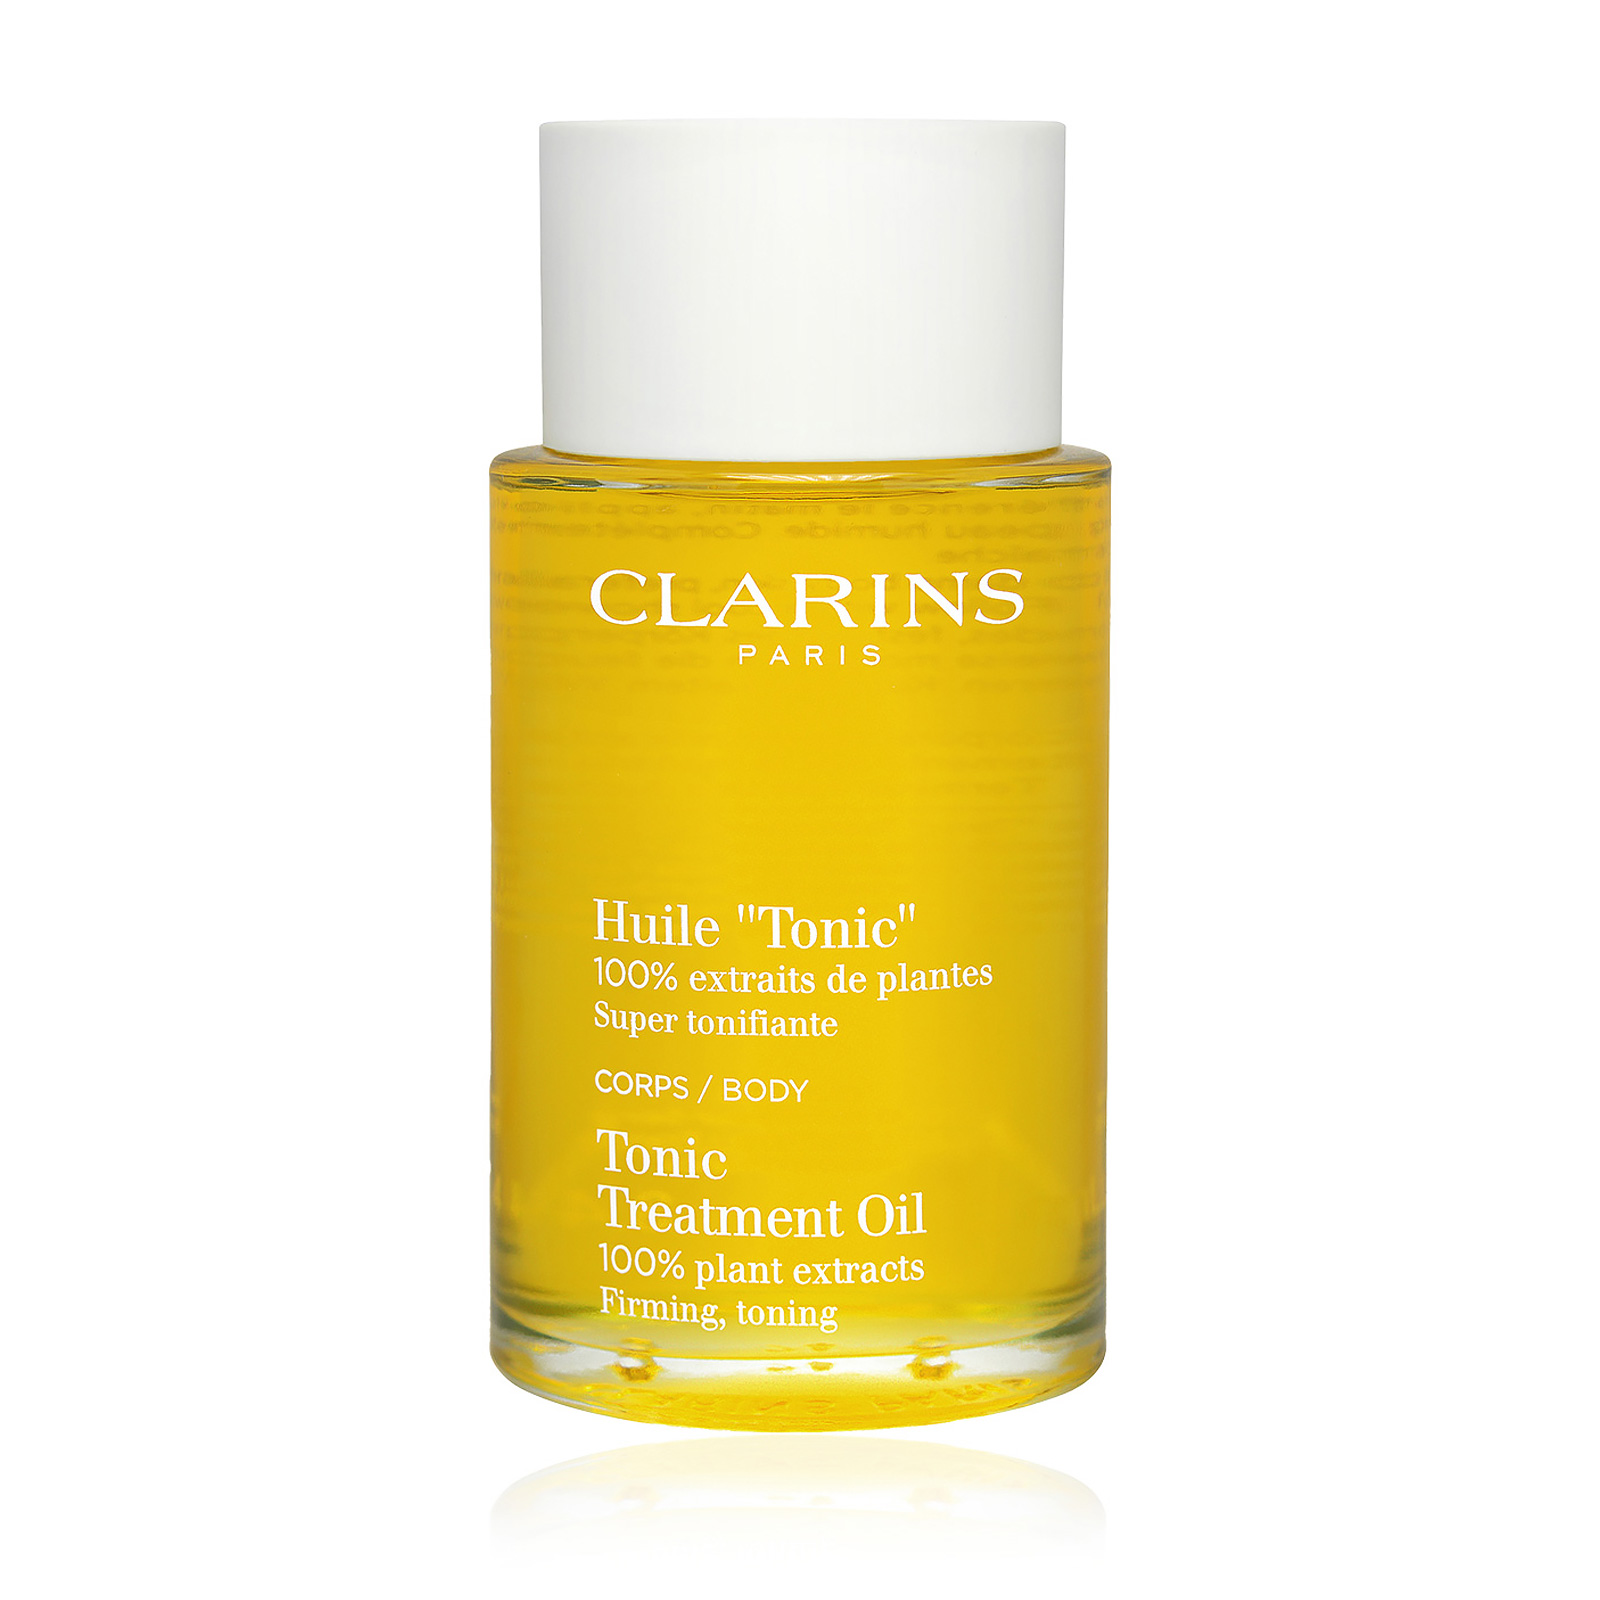 Body Treatment Oil (Firming & Toning)